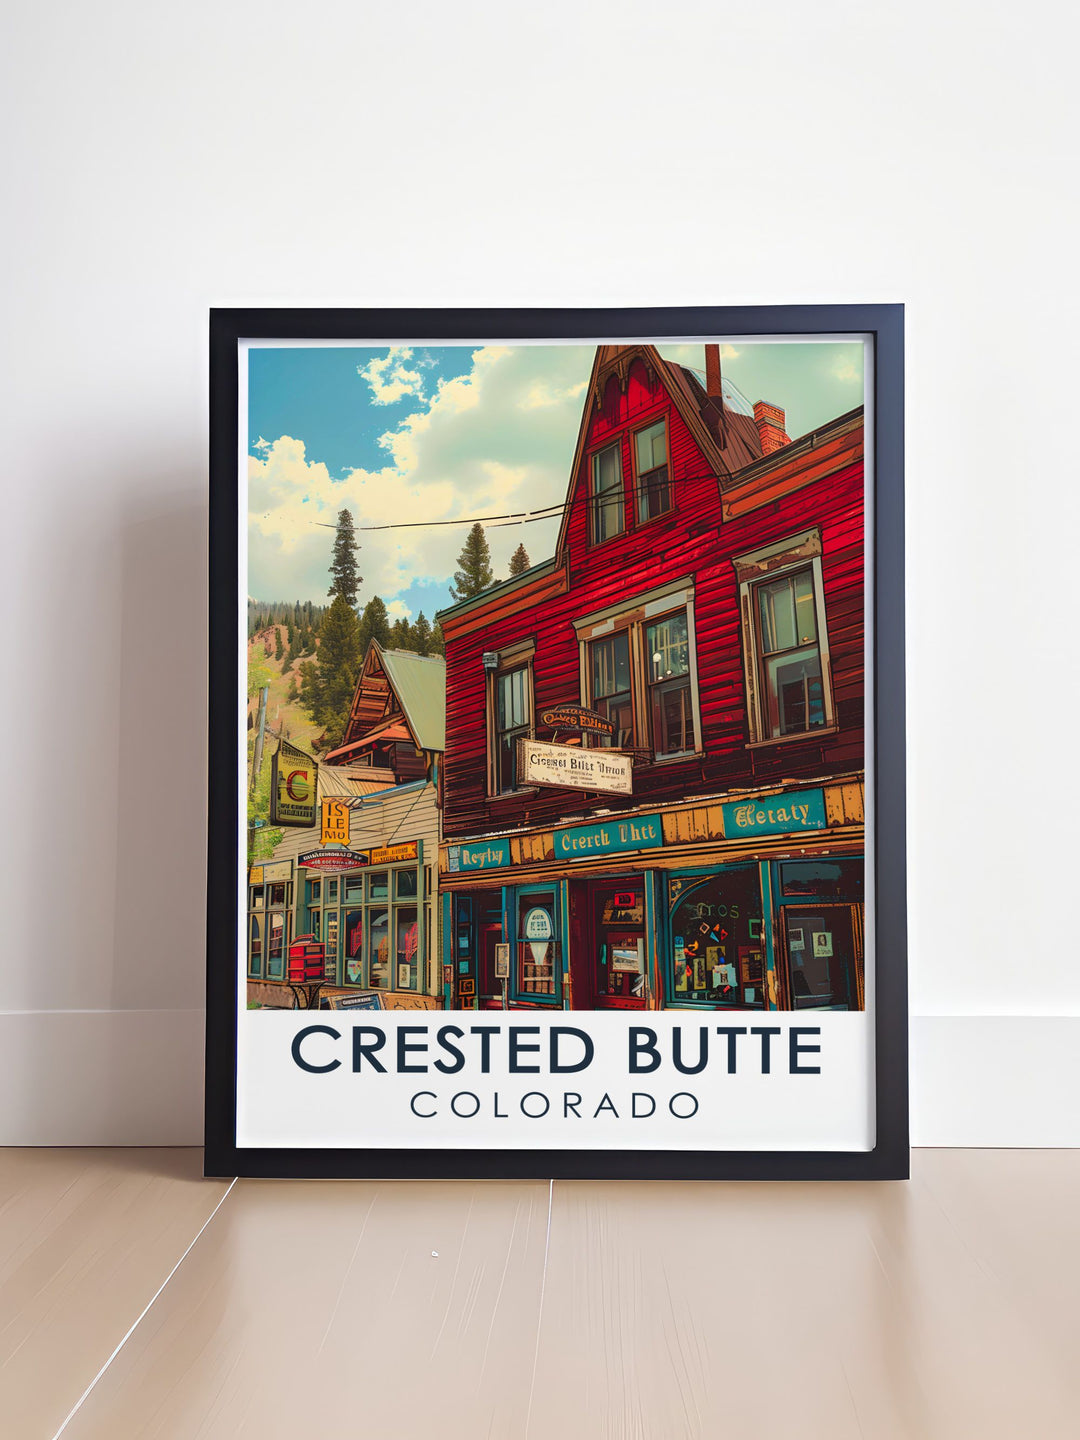 Bring the stunning scenery of the Rocky Mountains into your home with a Crested Butte Mountain Resort wall art piece featuring detailed illustrations and rich colors perfect for creating a serene and majestic atmosphere in any room.